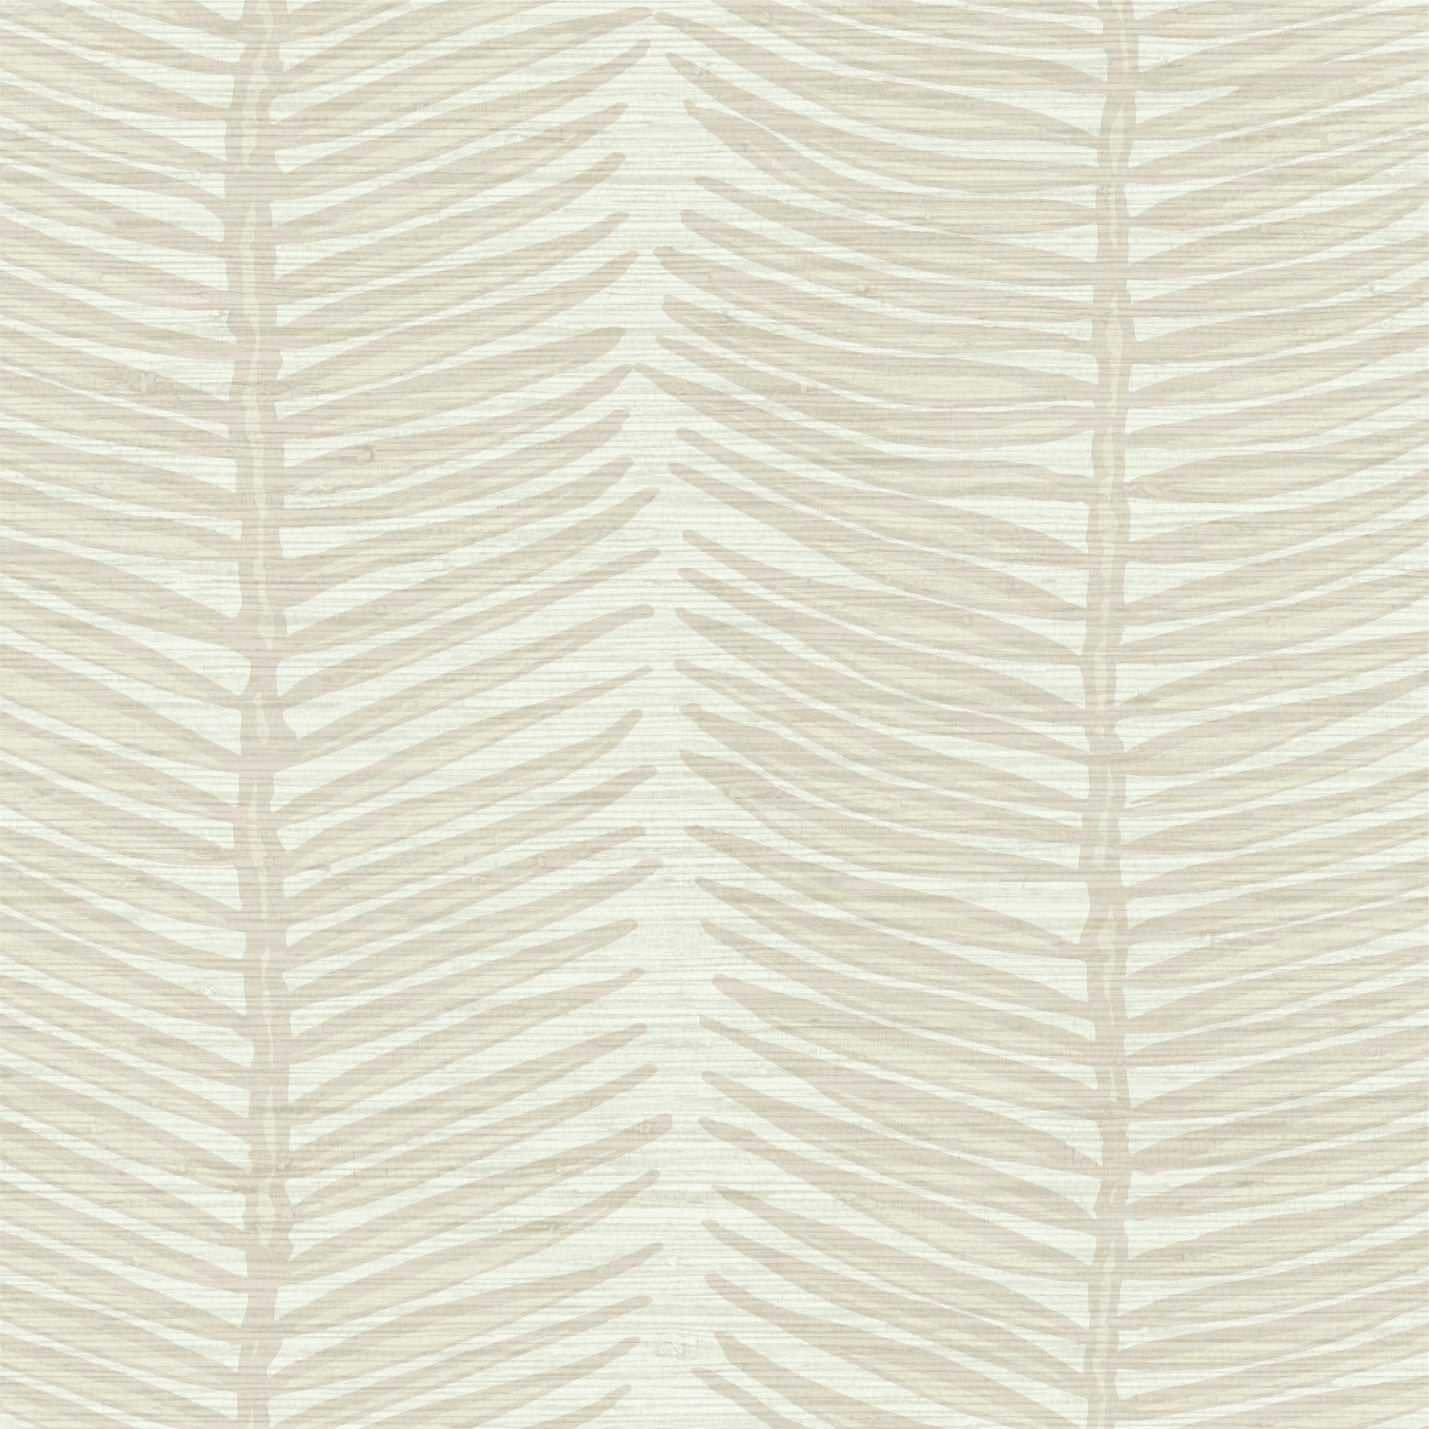 Grasscloth wallpaper Natural Textured Eco-Friendly Non-toxic High-quality Sustainable Interior Design Bold Custom Tailor-made Retro chic Tropical Jungle Coastal Garden Seaside Seashore Waterfront Vacation home styling Retreat Relaxed beach vibes Beach cottage Shoreline Oceanfront Nautical Cabana preppy palm fern leaf vertical stripe neutral tonal tan sand beige off-white white taupe